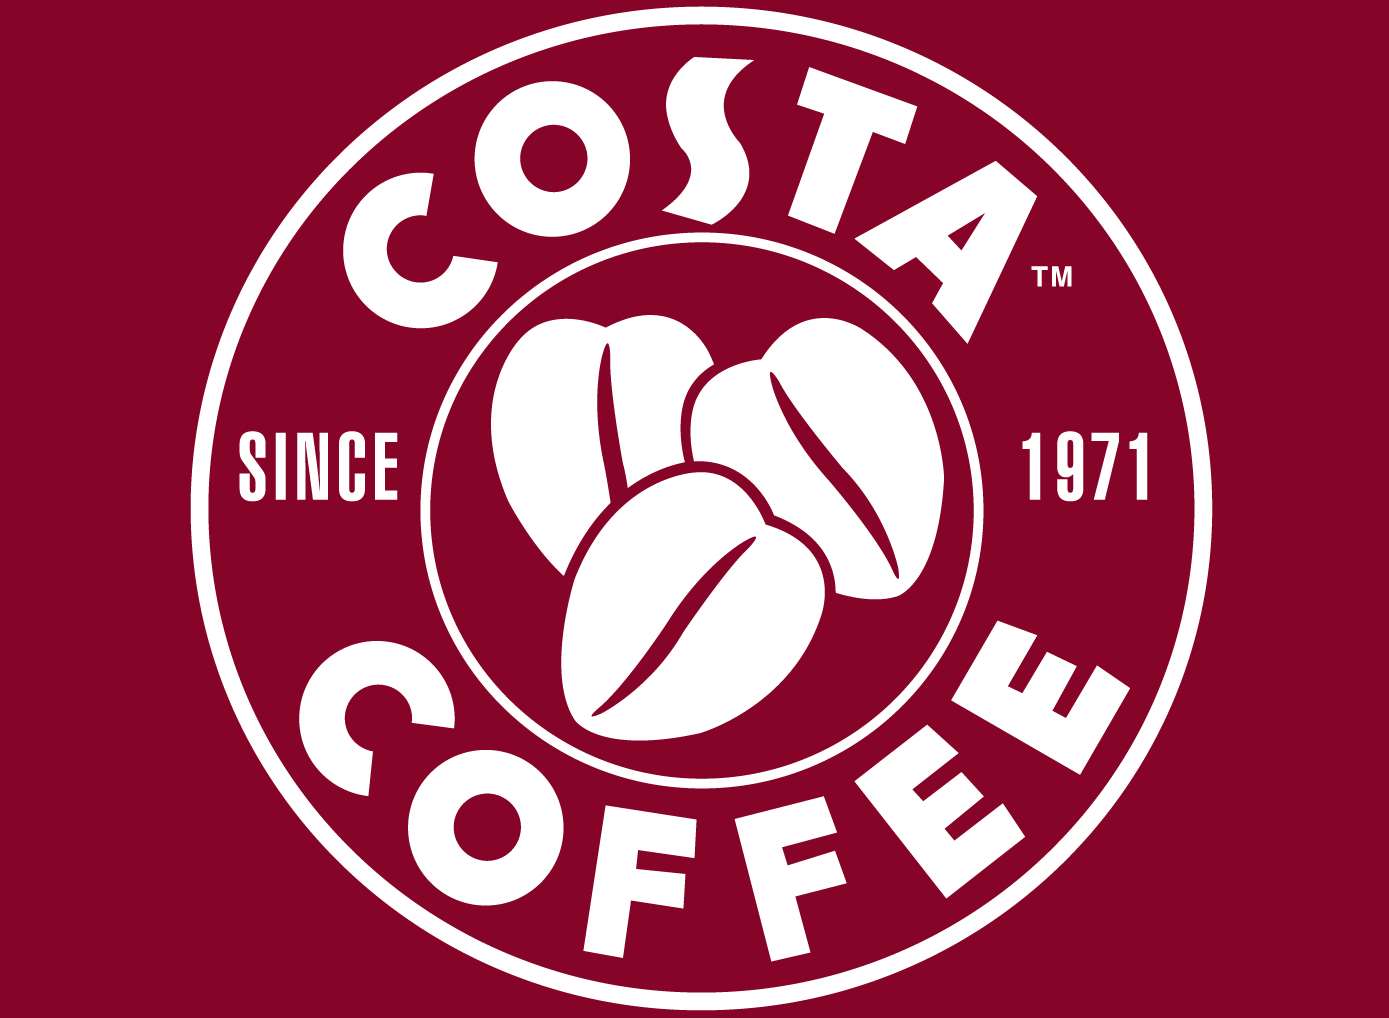 Costa Coffee to open shop on Sheppey